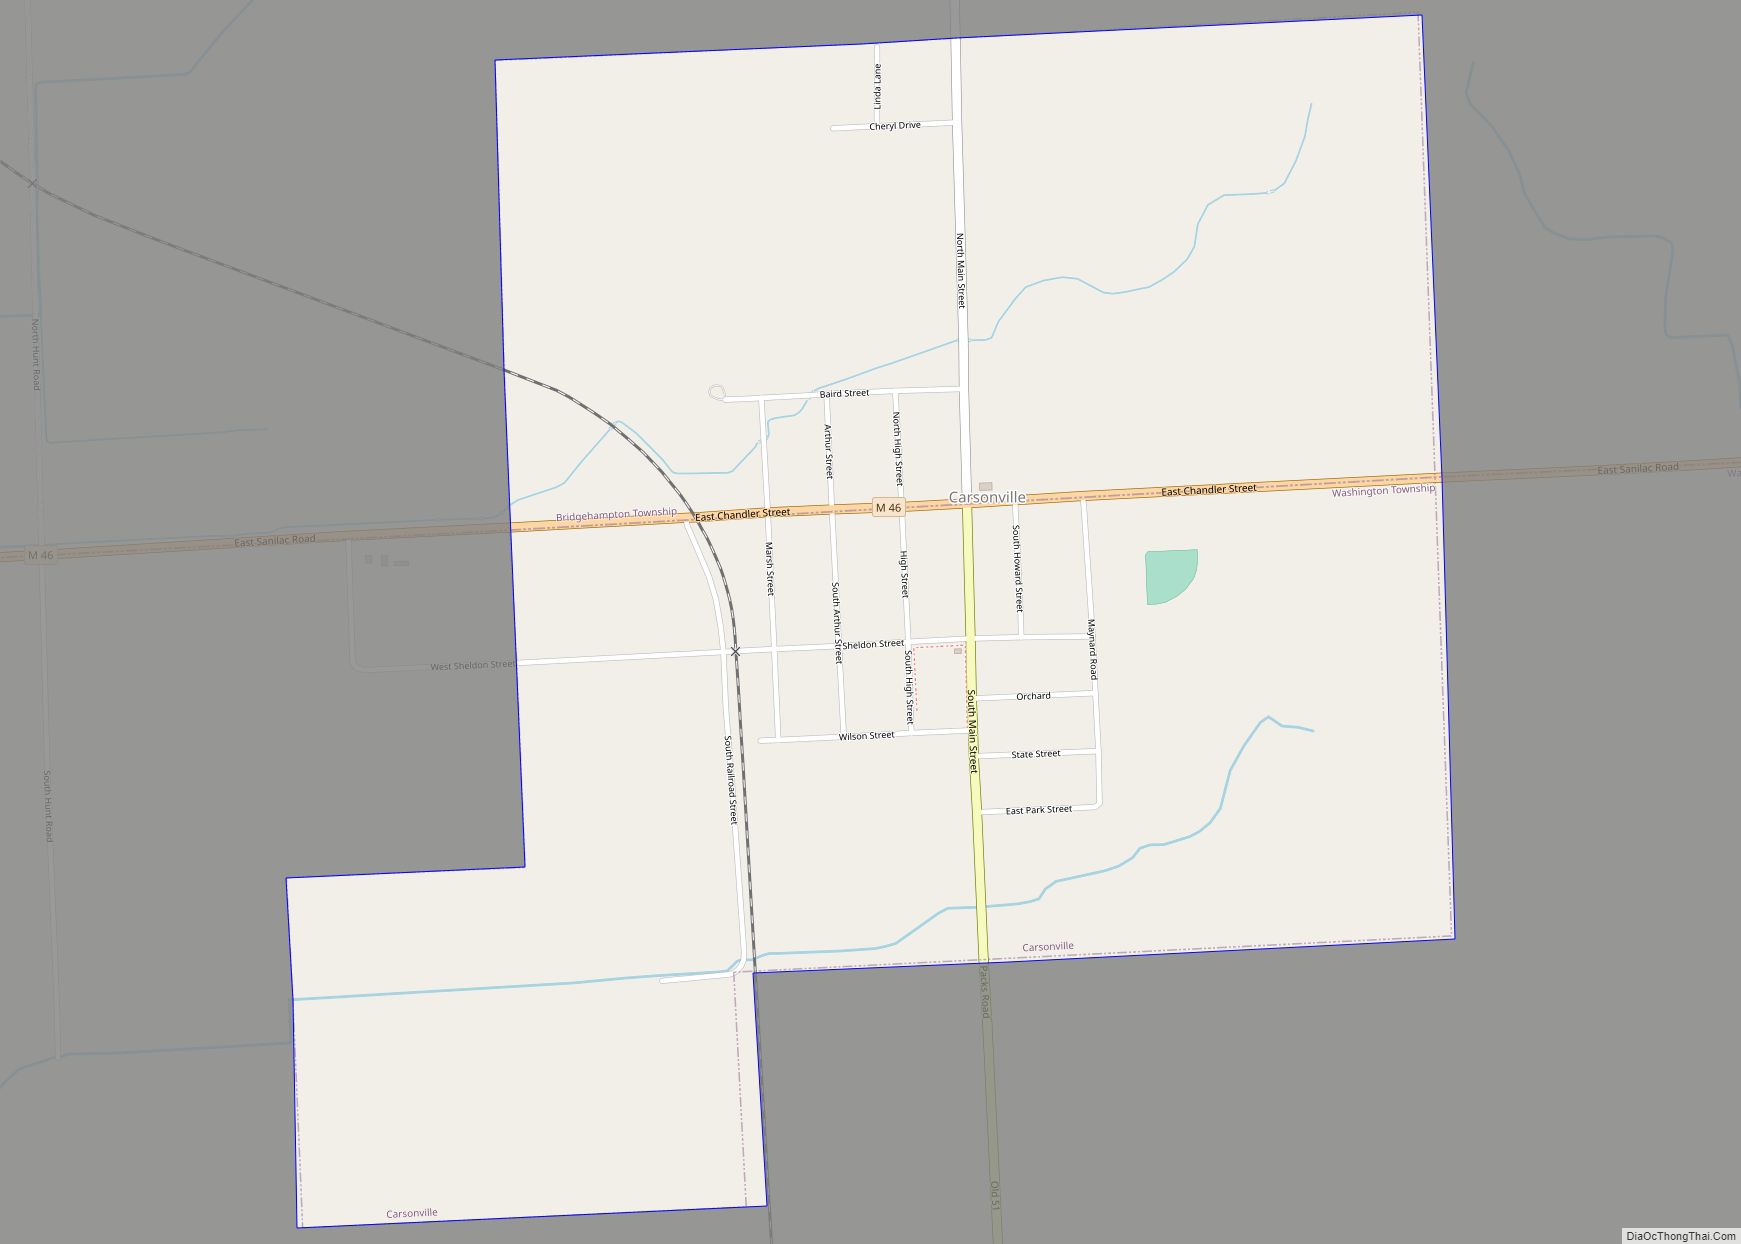 Map of Carsonville village